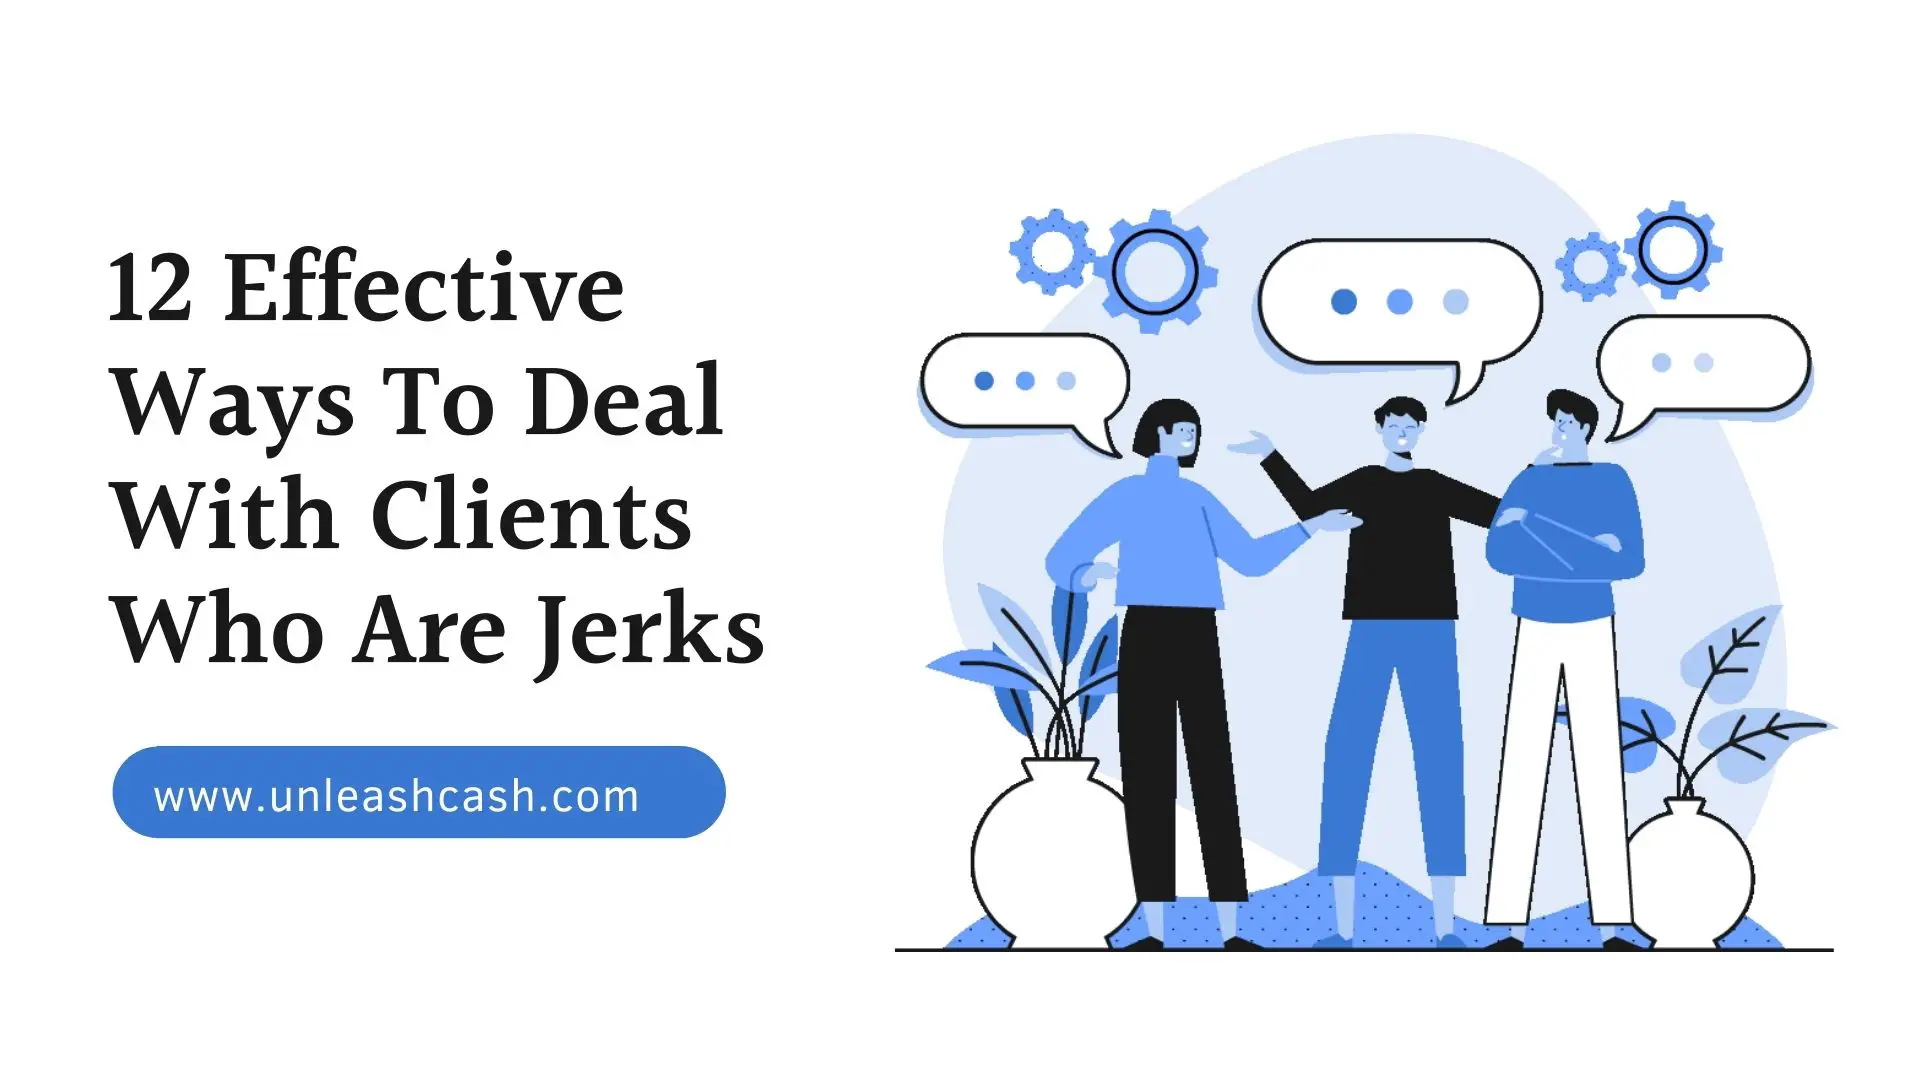 12 Effective Ways To Deal With Clients Who Are Jerks